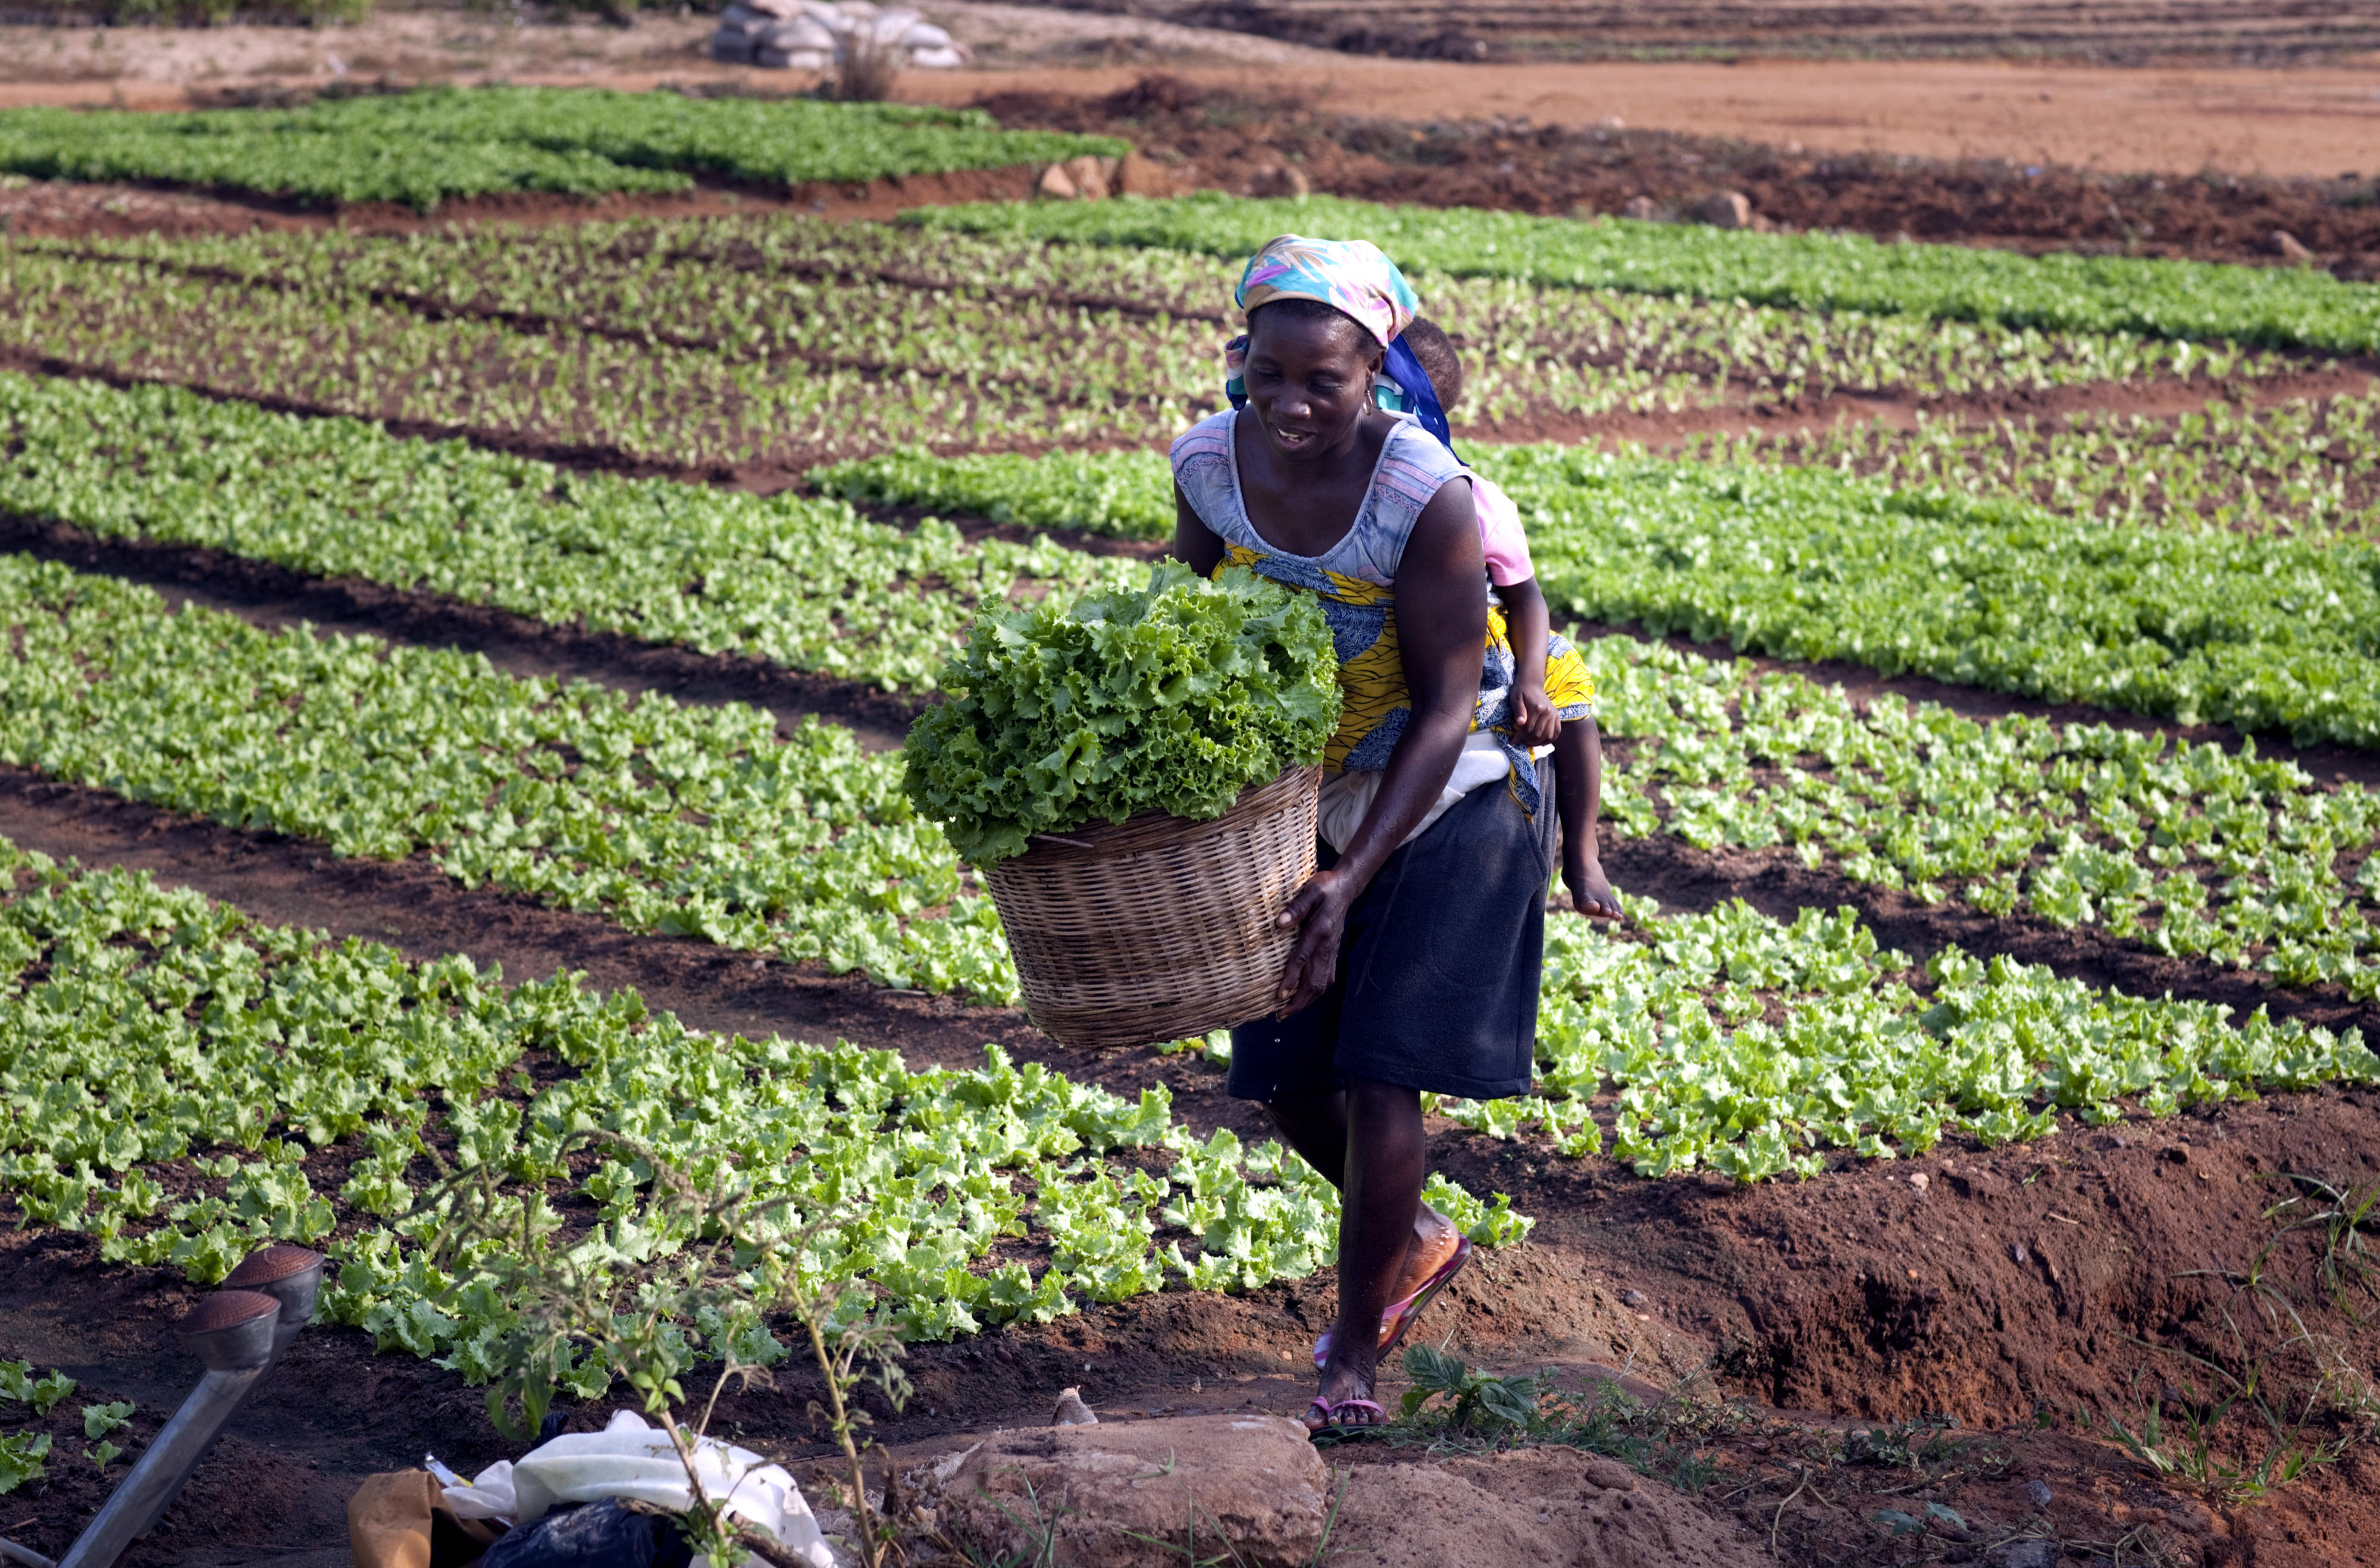 A woman in Togo harvests lettuce. She carries a toddler on her back.